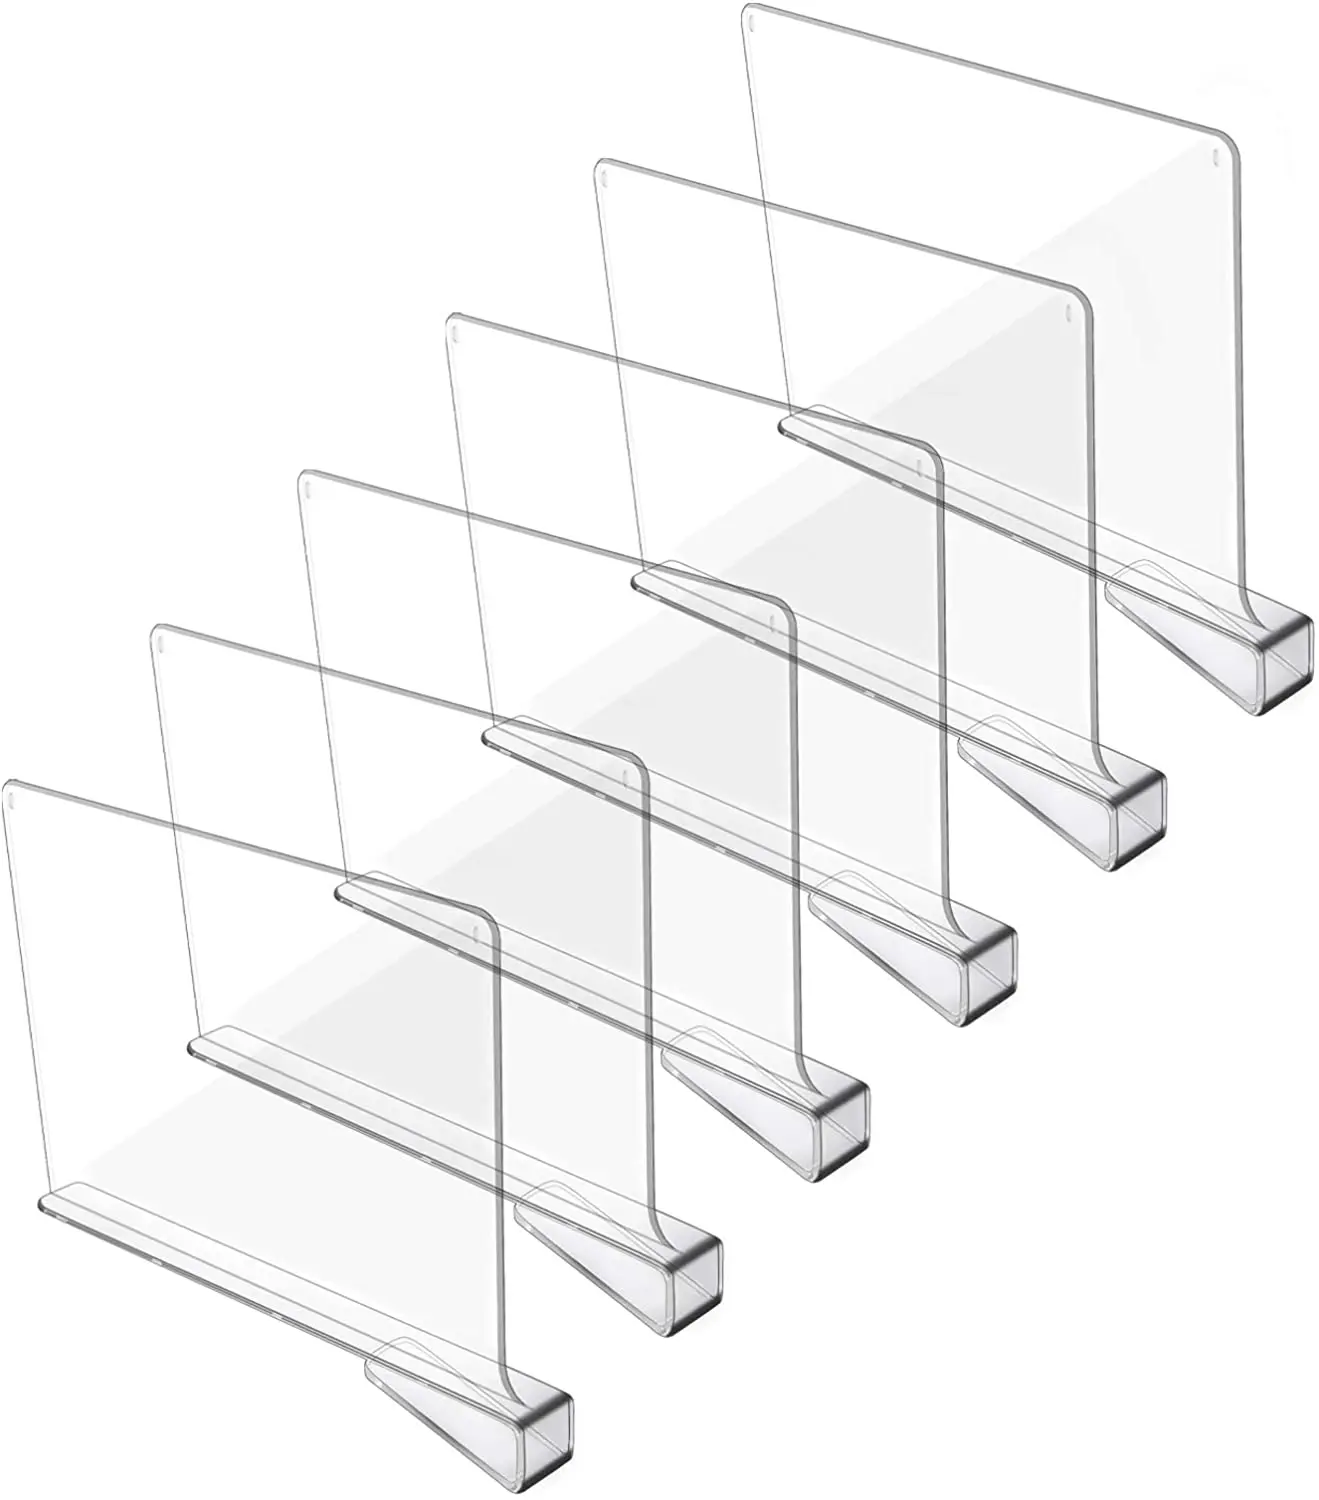 Clear Acrylic PVC Plastic Shelf Dividers For Kitchen Cabinets